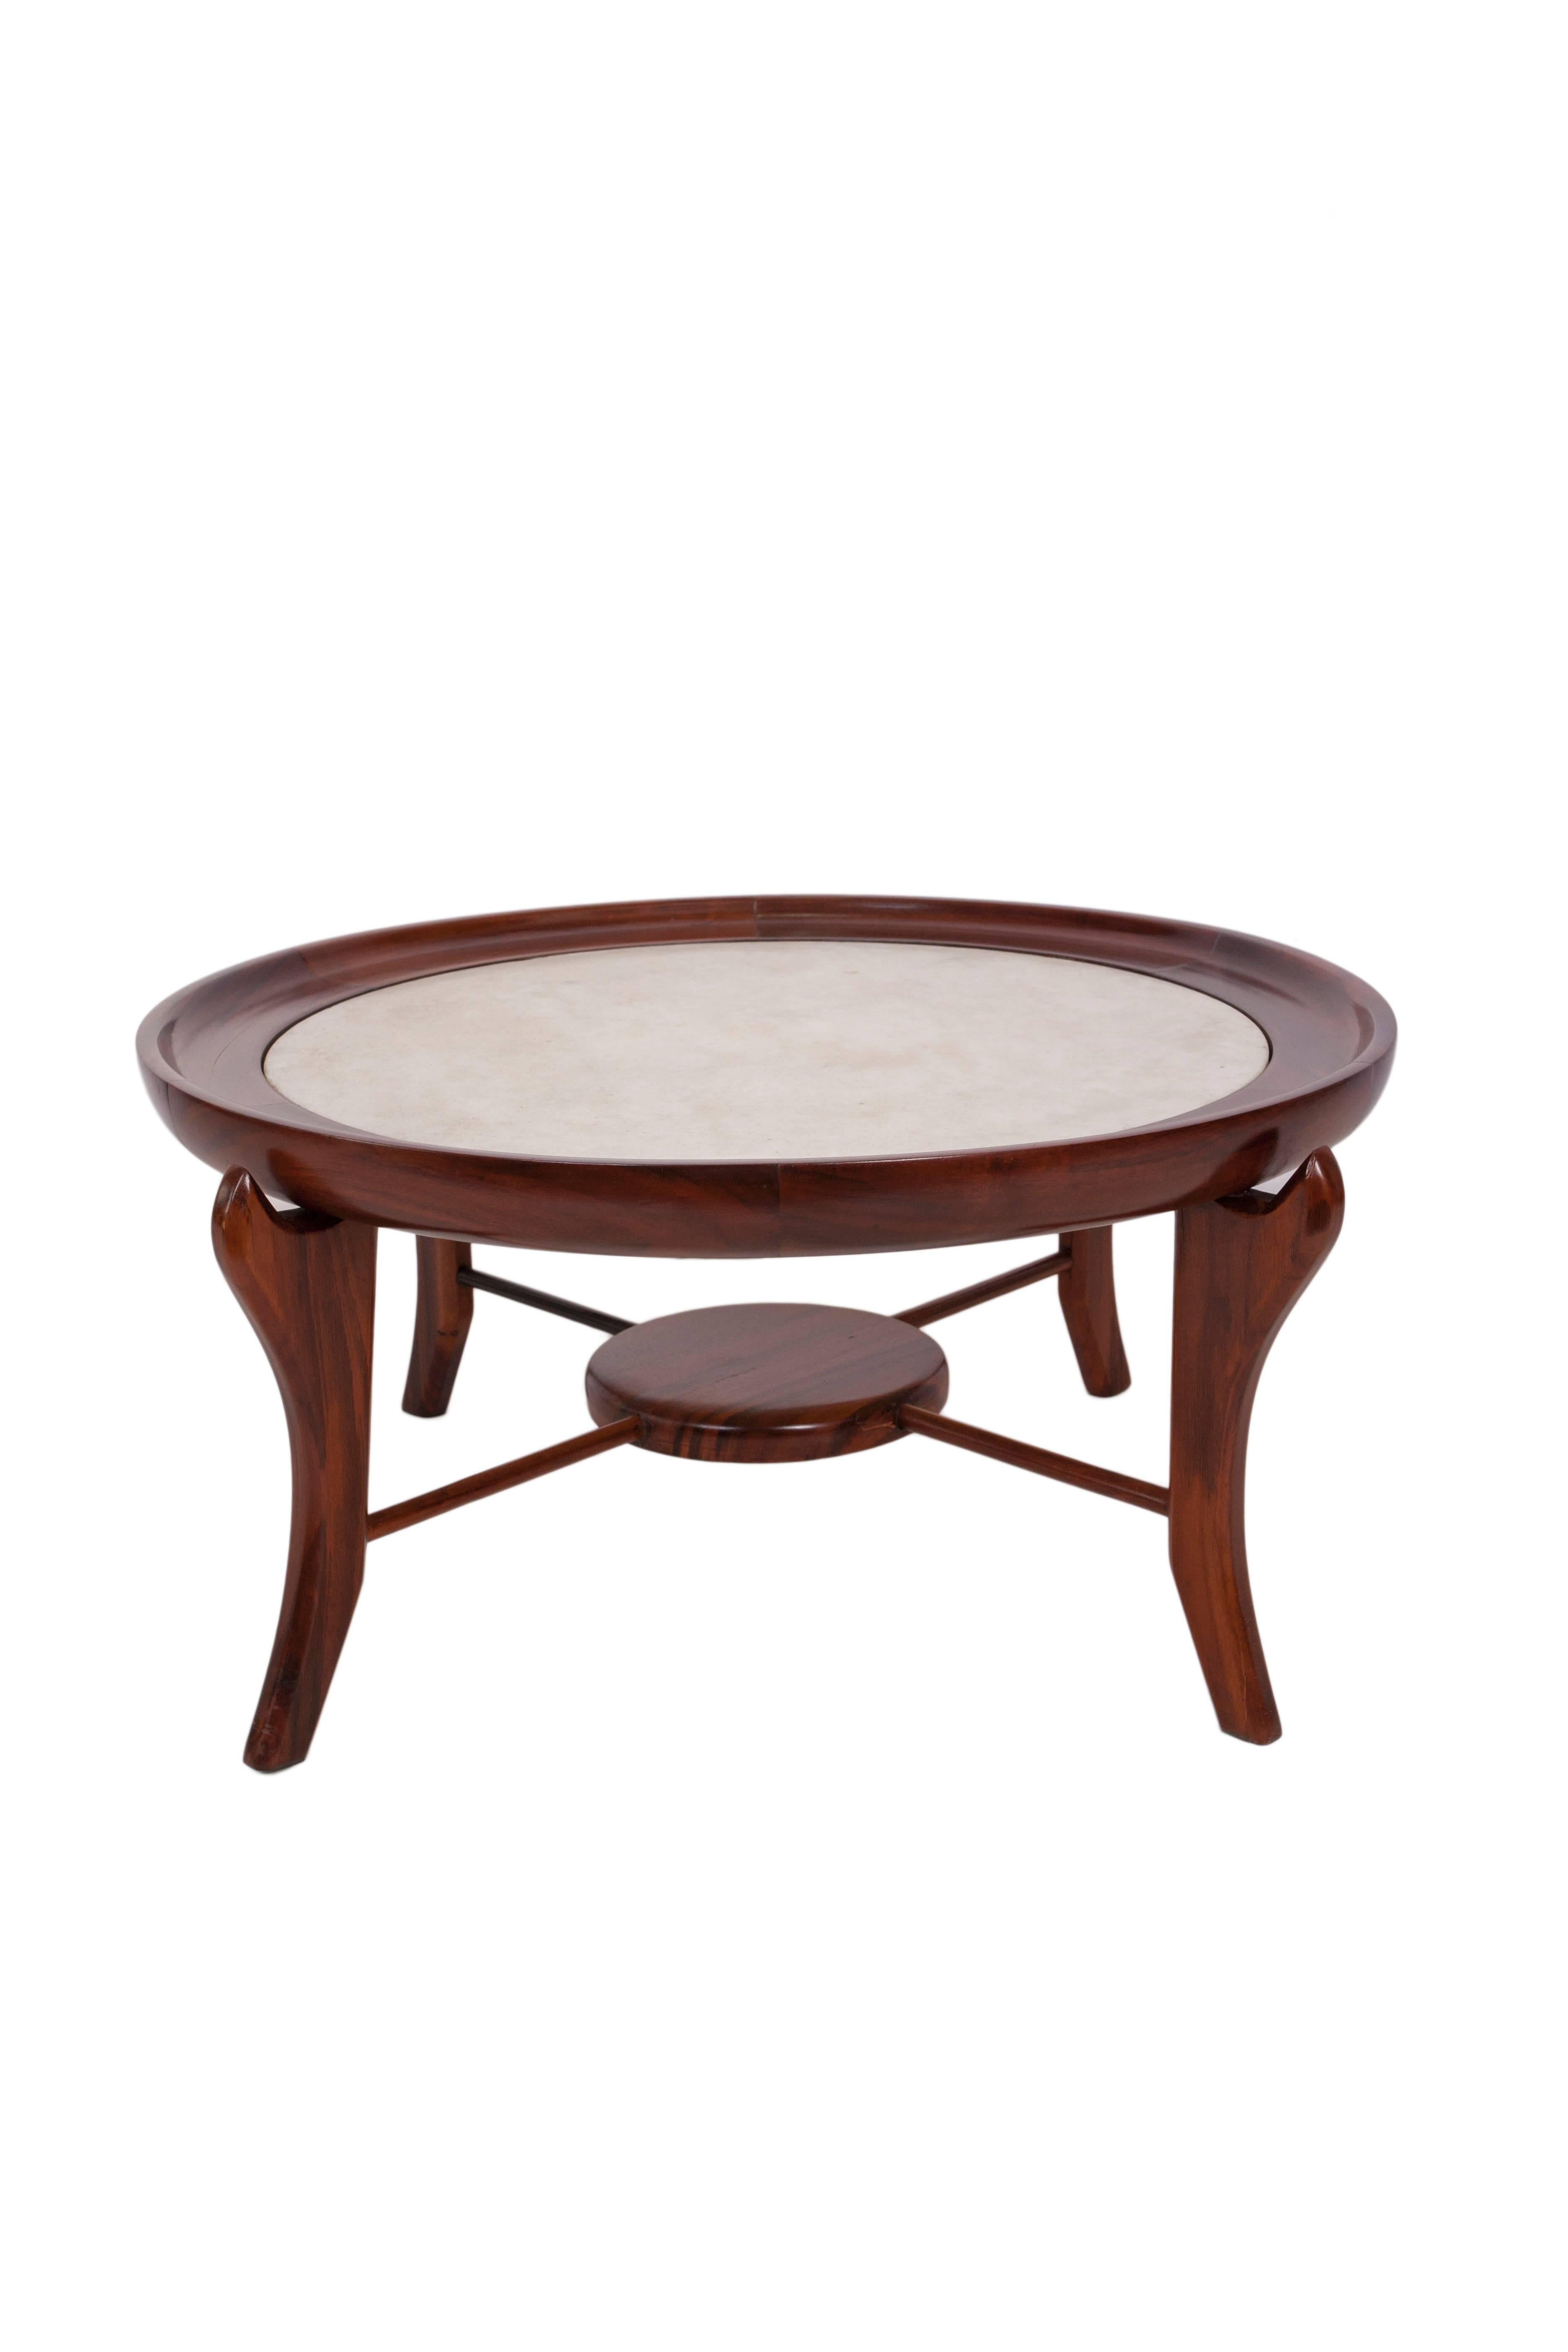 Mid-Century Modern Maracanã Coffee Table Attributed to Giuseppe Scapinelli